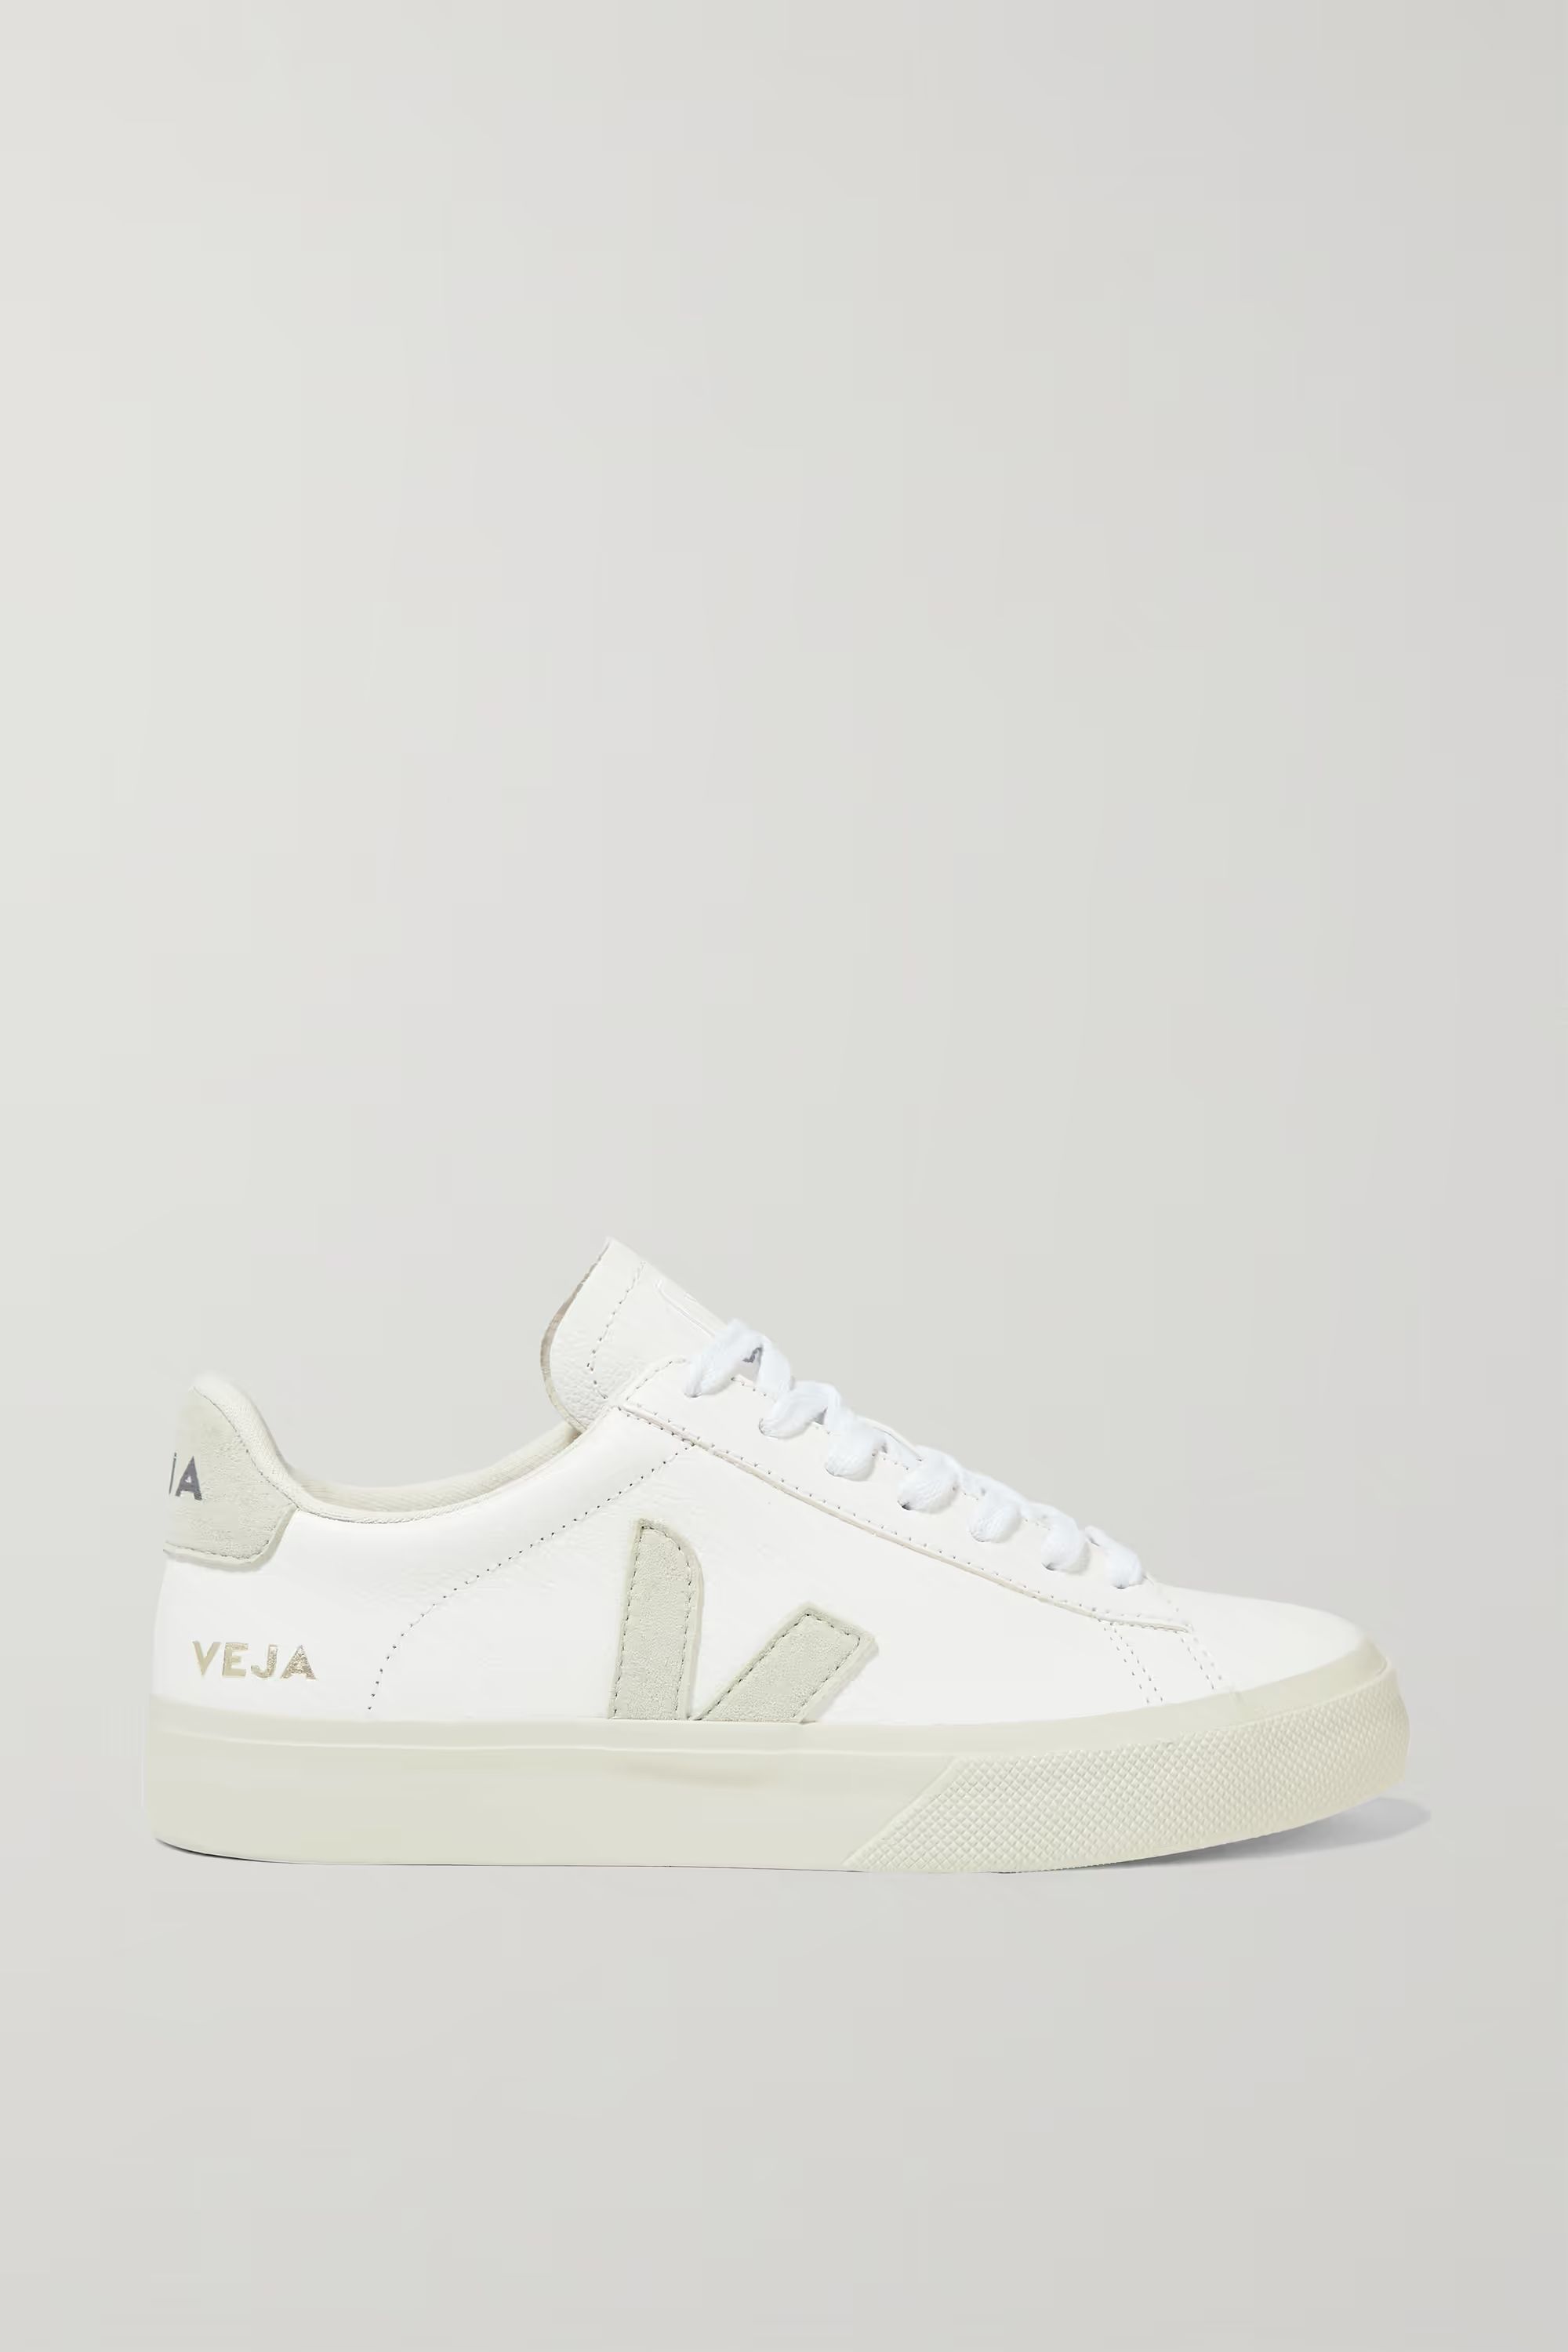 White + NET SUSTAIN Campo leather and suede sneakers | VEJA | NET-A-PORTER | NET-A-PORTER (US)